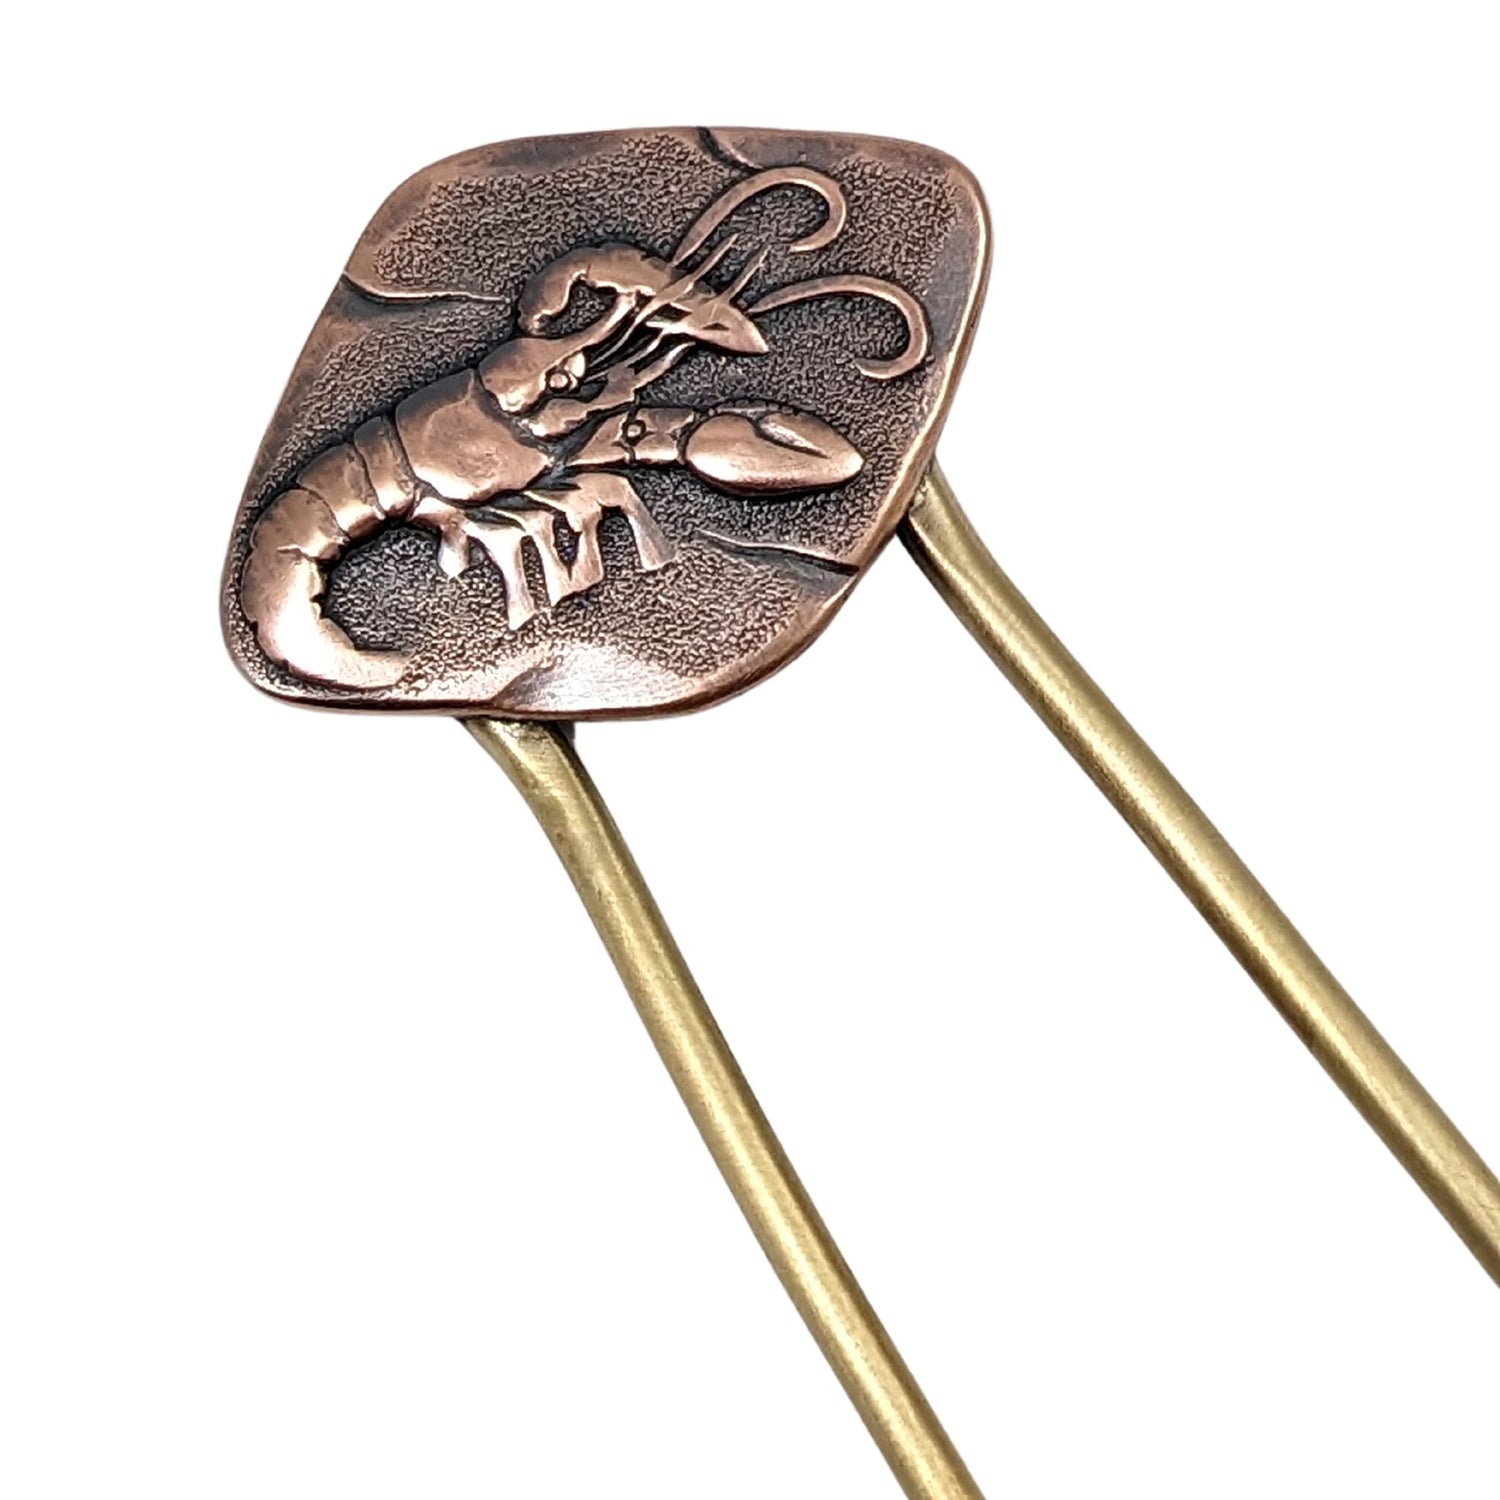 Lobster hair fork. The lobster design is an impression on a rectangular shaped piece of copper. The fork is brass.